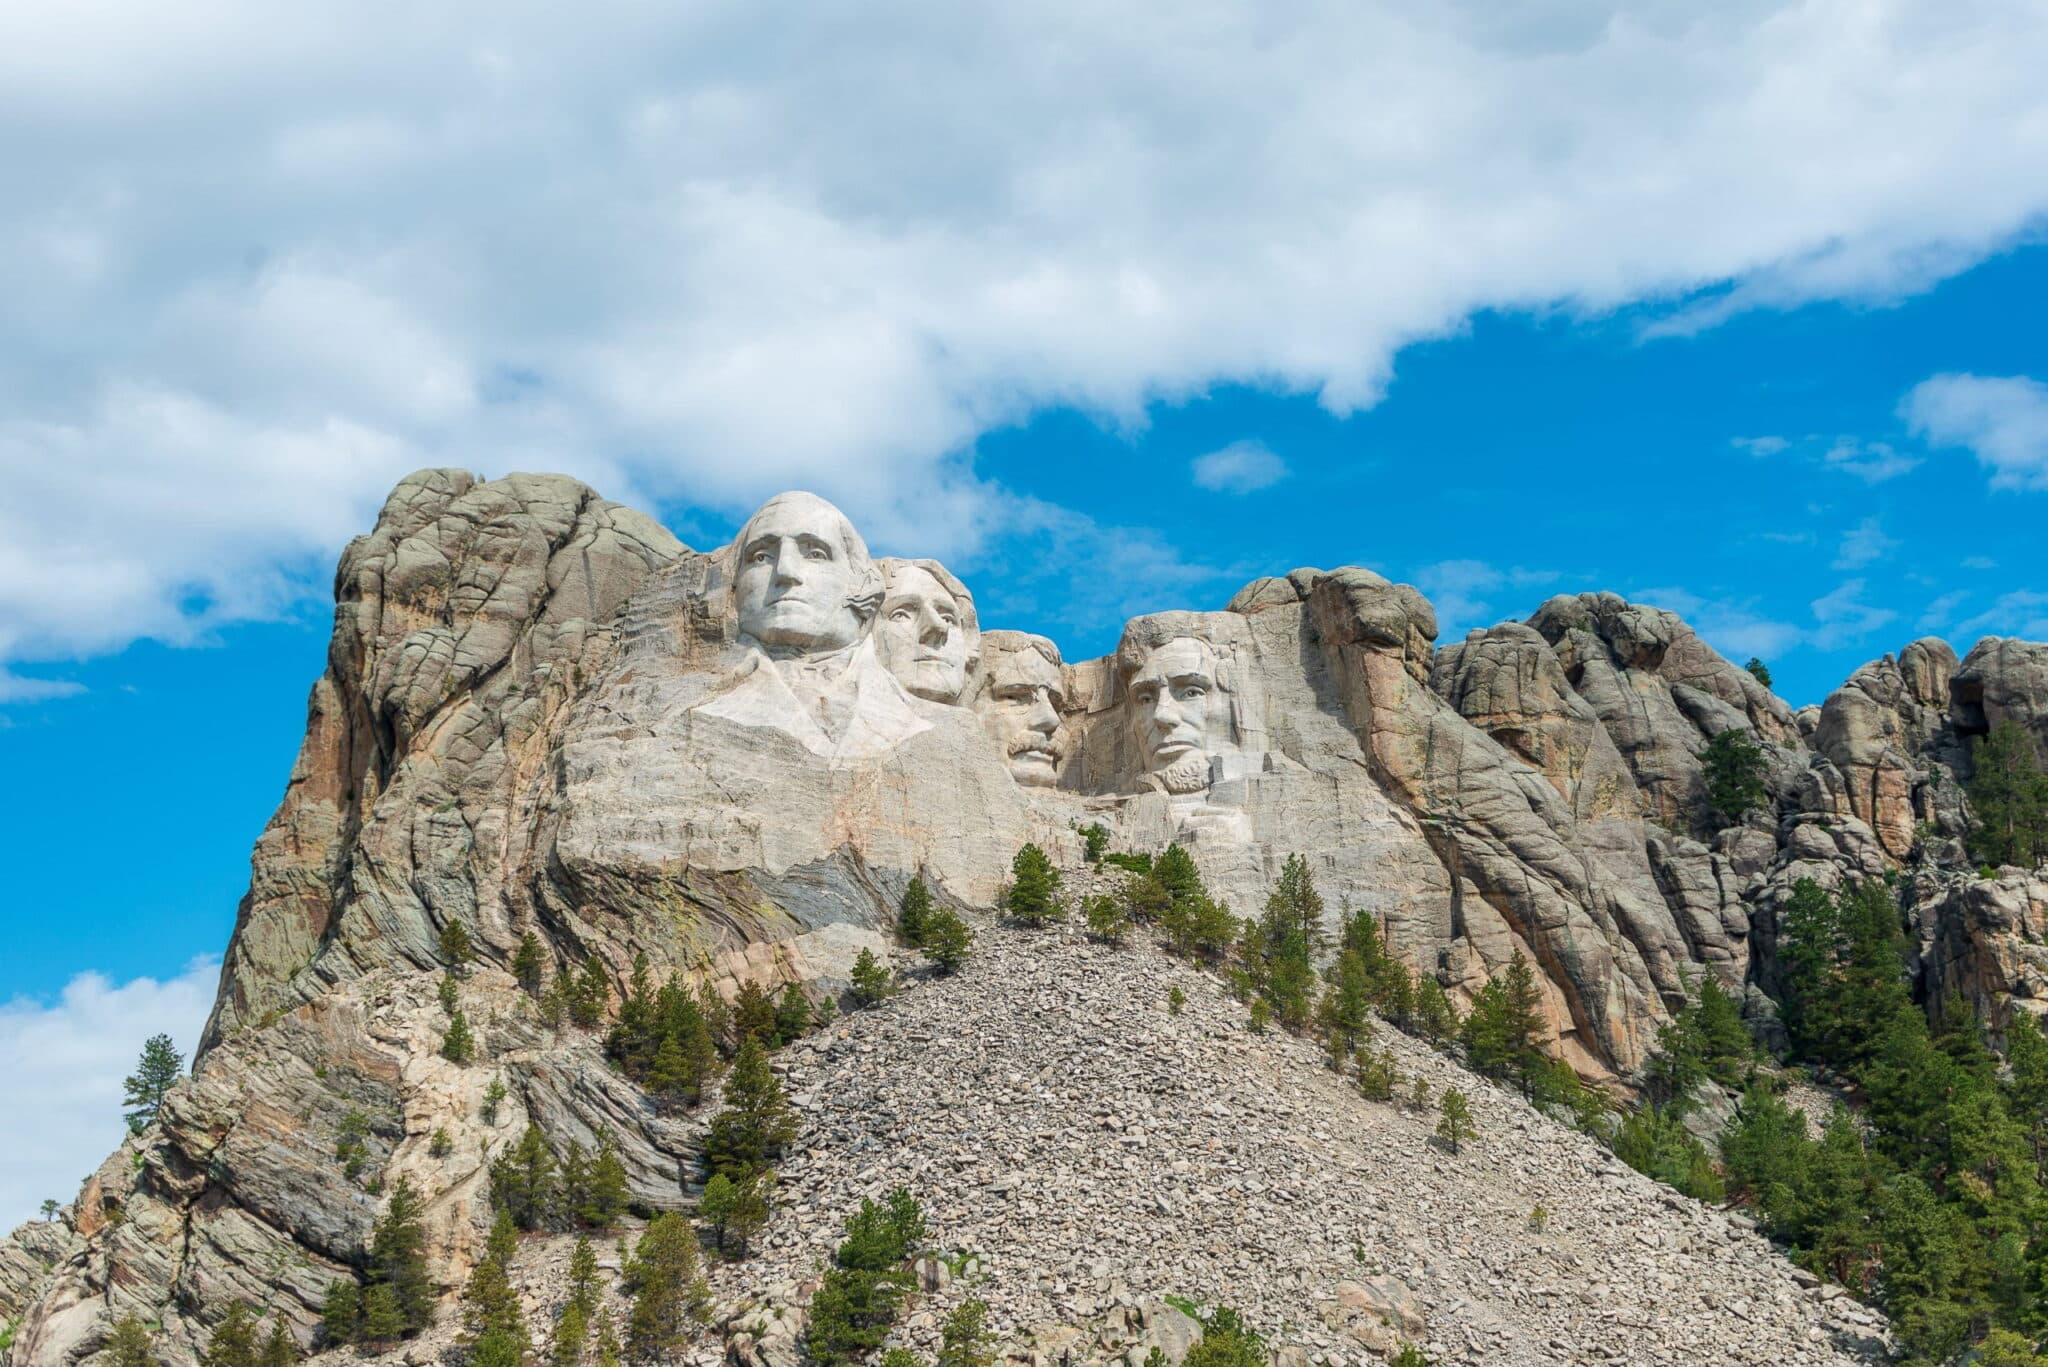 <p>Consider taking a road trip through South Dakota's rolling prairies, twisting mountain roads, and iconic American monuments. Start at historical Mount Rushmore and Crazy Horse Memorial. Take US-16 E to enjoy a couple of days in Rapid City, a vibrant town with outdoor festivals, concerts, and a unique food scene. Travel I-90 E to Wall as a base for exploring Badlands National Park. Drive the Badlands Loop Scenic Byway to see its 16 stunning overlooks and hike among its surreal landscape.</p>